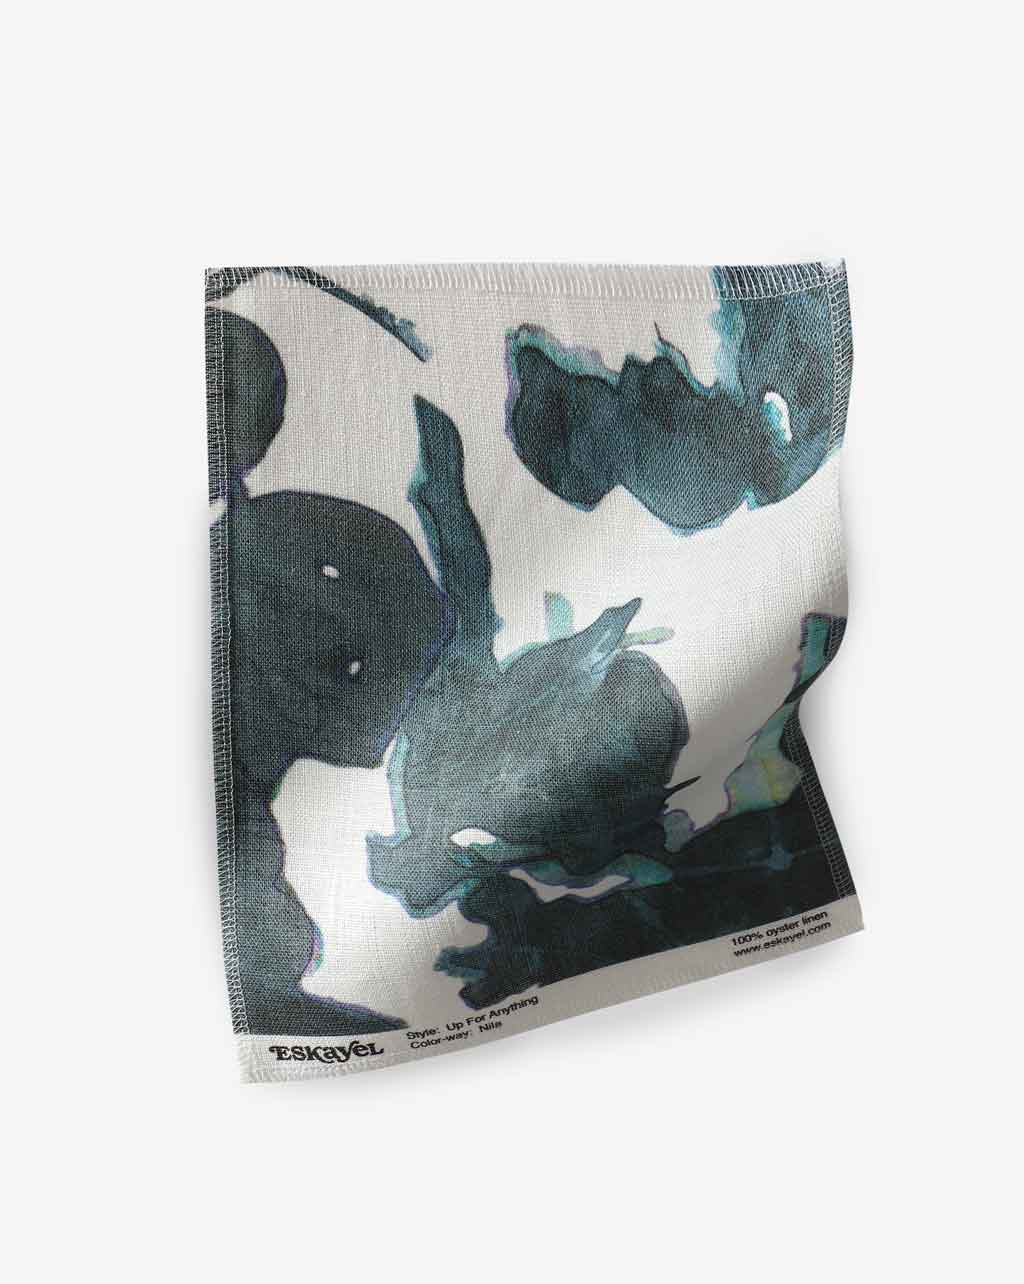 A Up For Anything Fabric with a botanical pattern in black and blue watercolor design.